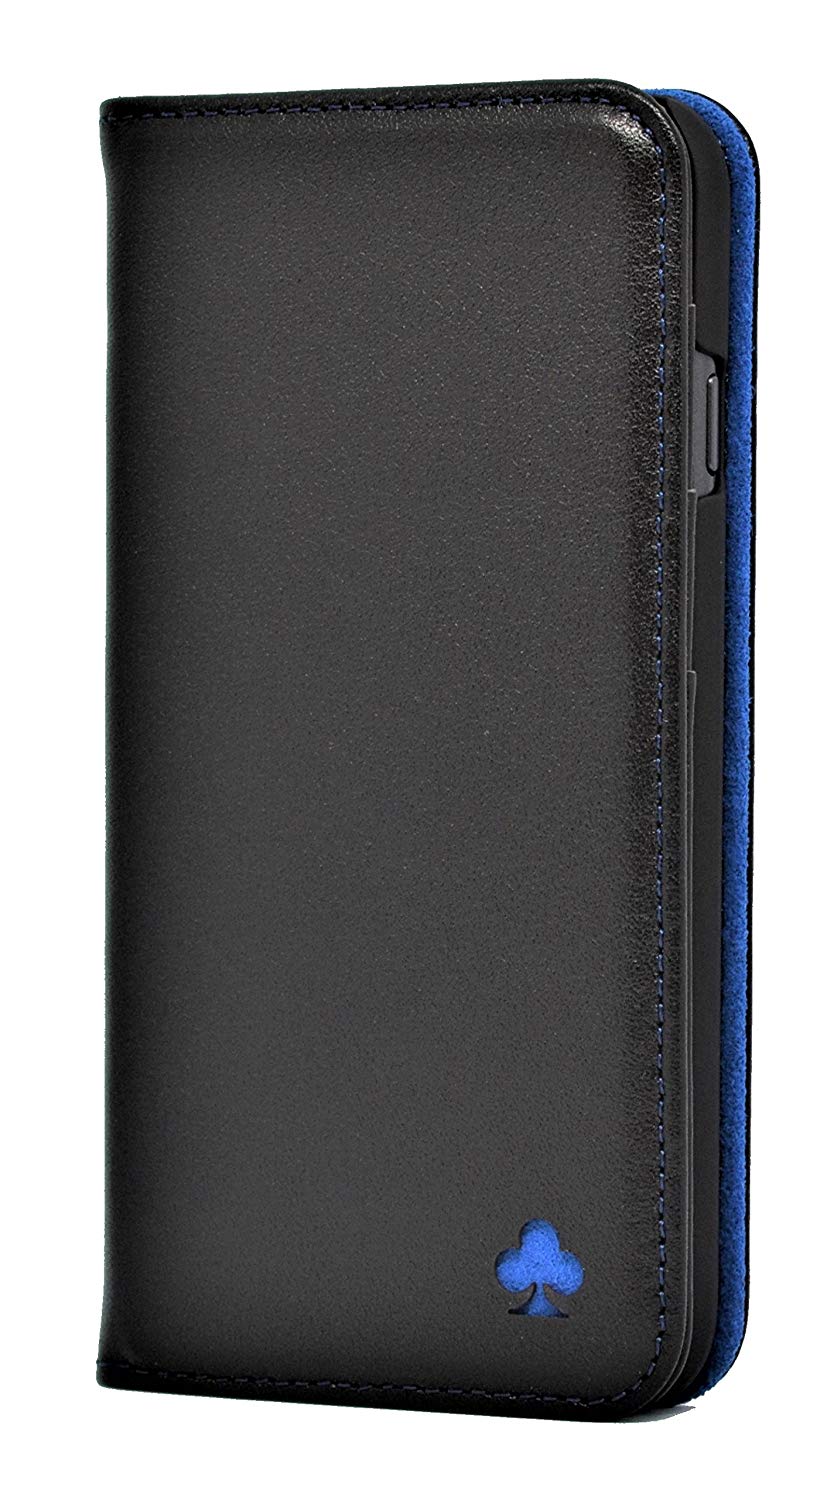 iPhone 6 / 6S Leather Case. Premium Slim Genuine Leather Stand Case/Cover/Wallet (Black & Blue)